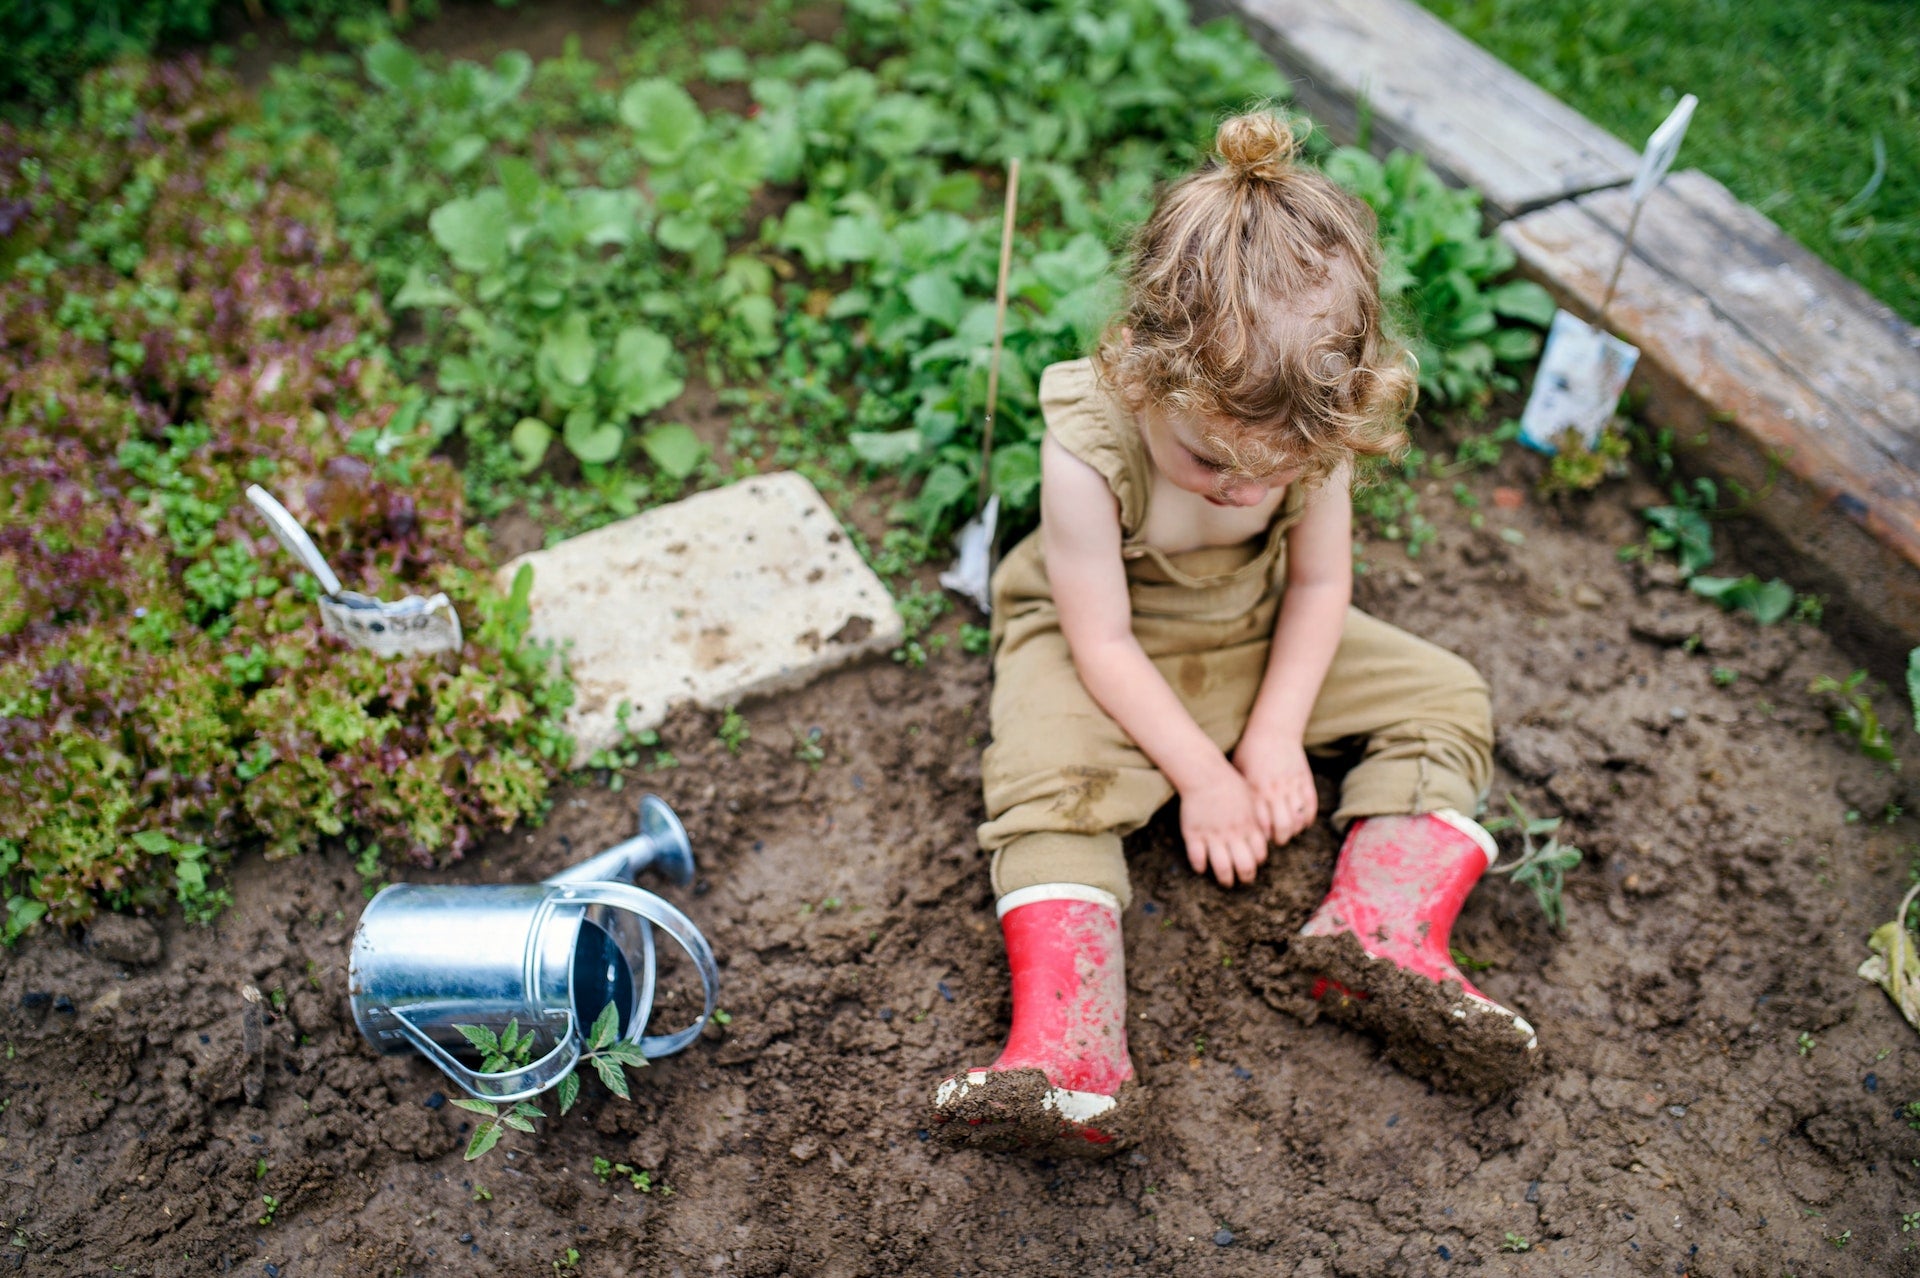 Toddler wearing red rain boots sitting in a garden bed, playing with the dirt.